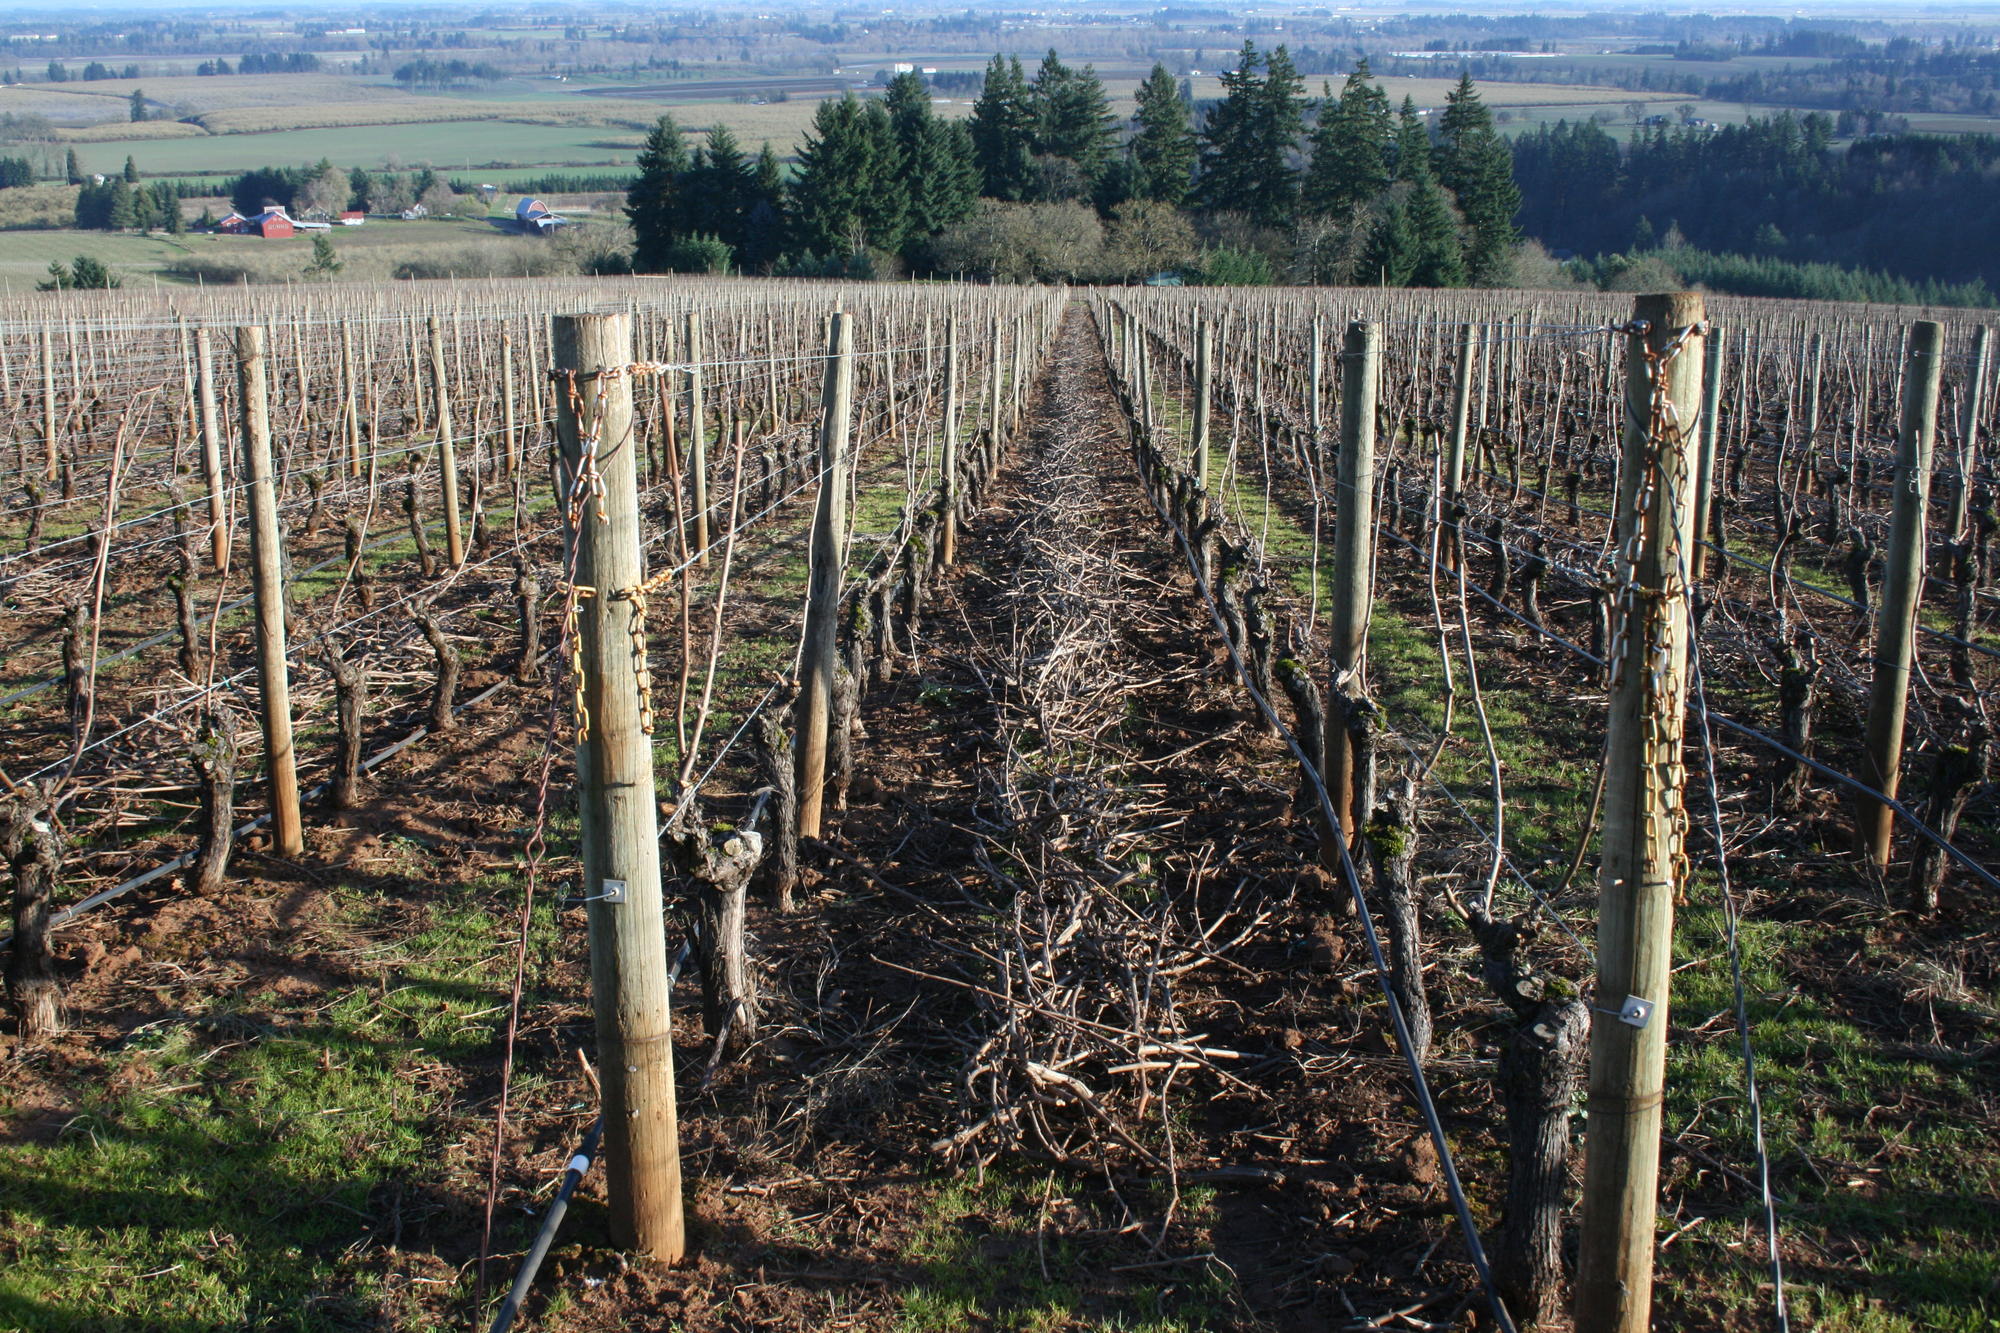 A vineyard worker removes the canes from the trellis while pruning grapevines and places the dormant canes in the alley.